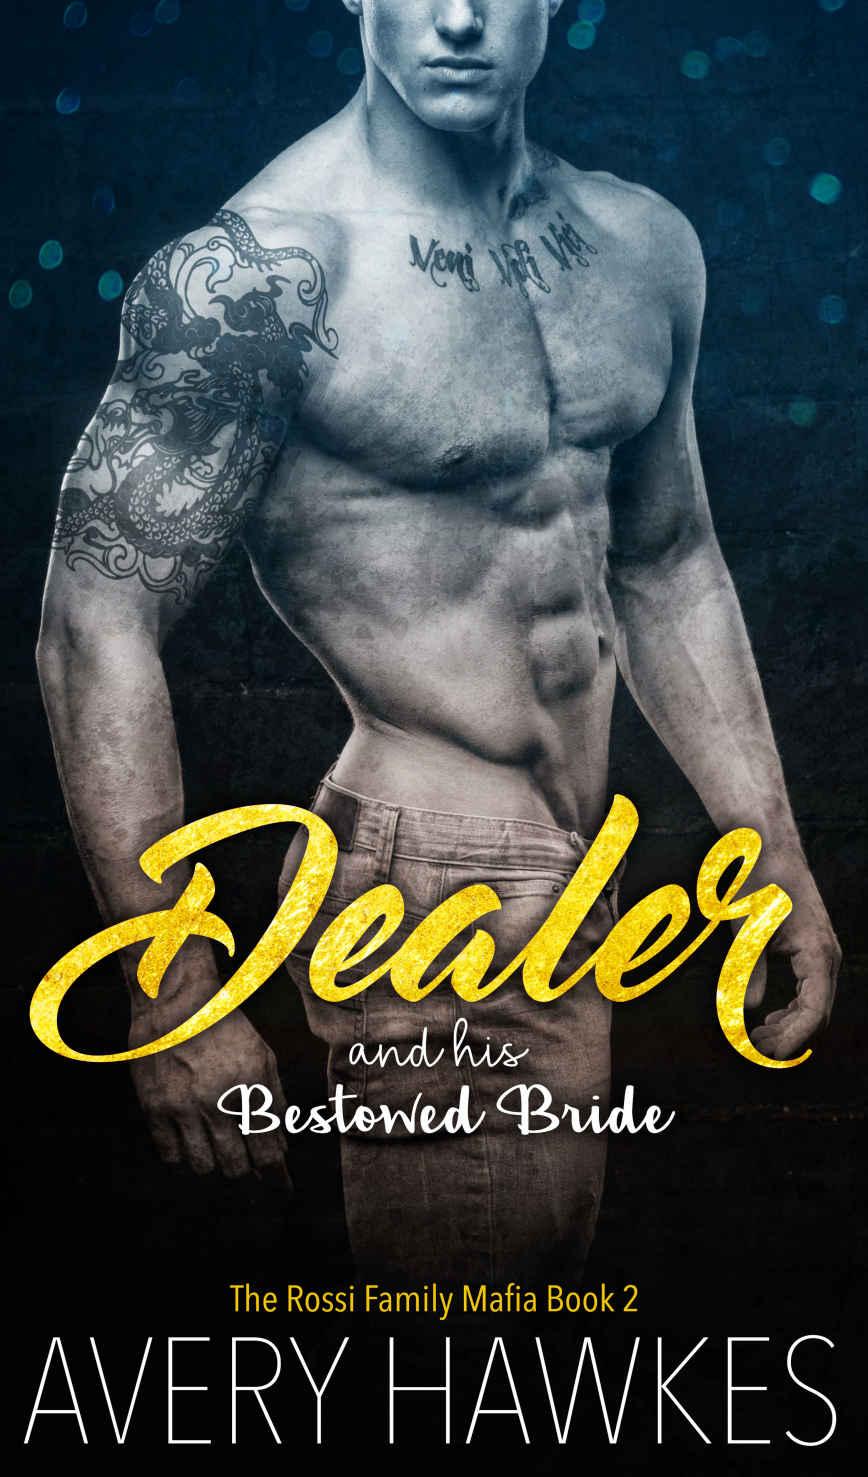 Dealer and his Bestowed Bride (The Rossi Family Mafia Book 2) by Avery Hawkes